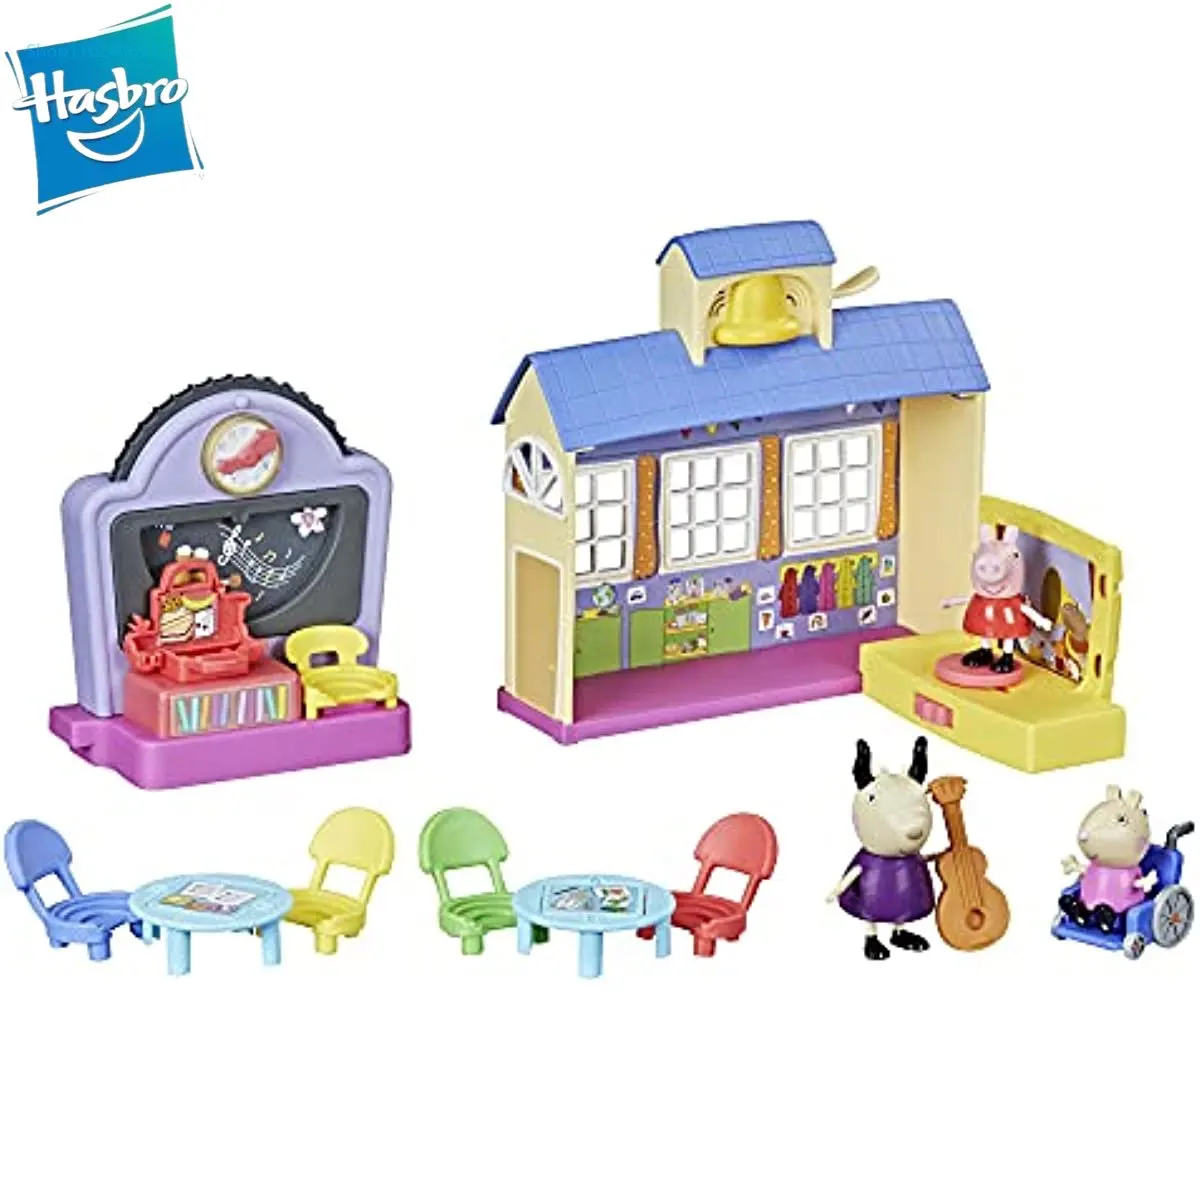 

Hasbro Peppa Pig Peppa’s Adventures Peppa's School Playgroup Preschool Toy for Ages 3 and Up peppa pig